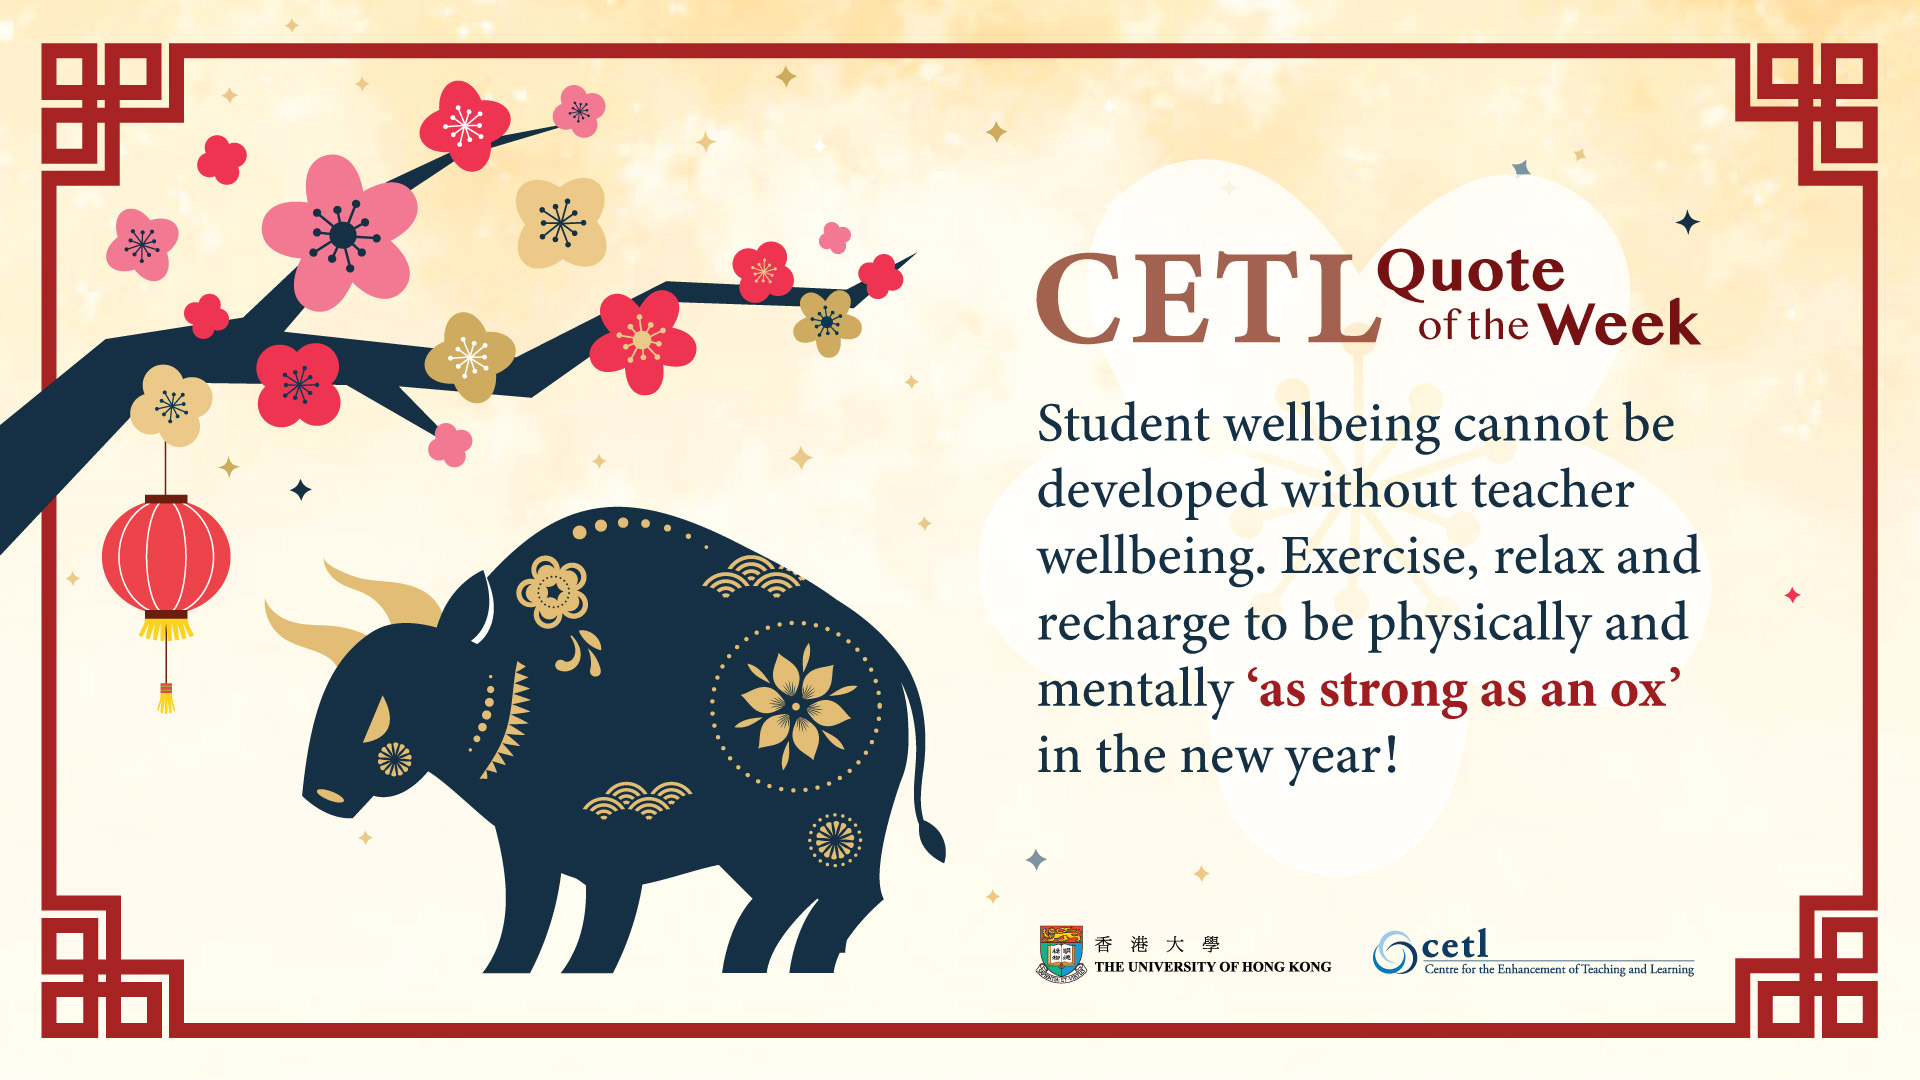 CETL - Student wellbeing cannot be developed without teacher wellbeing. Exercise, relax and recharge to be physically and mentally ‘as strong as an ox’ in the new year!